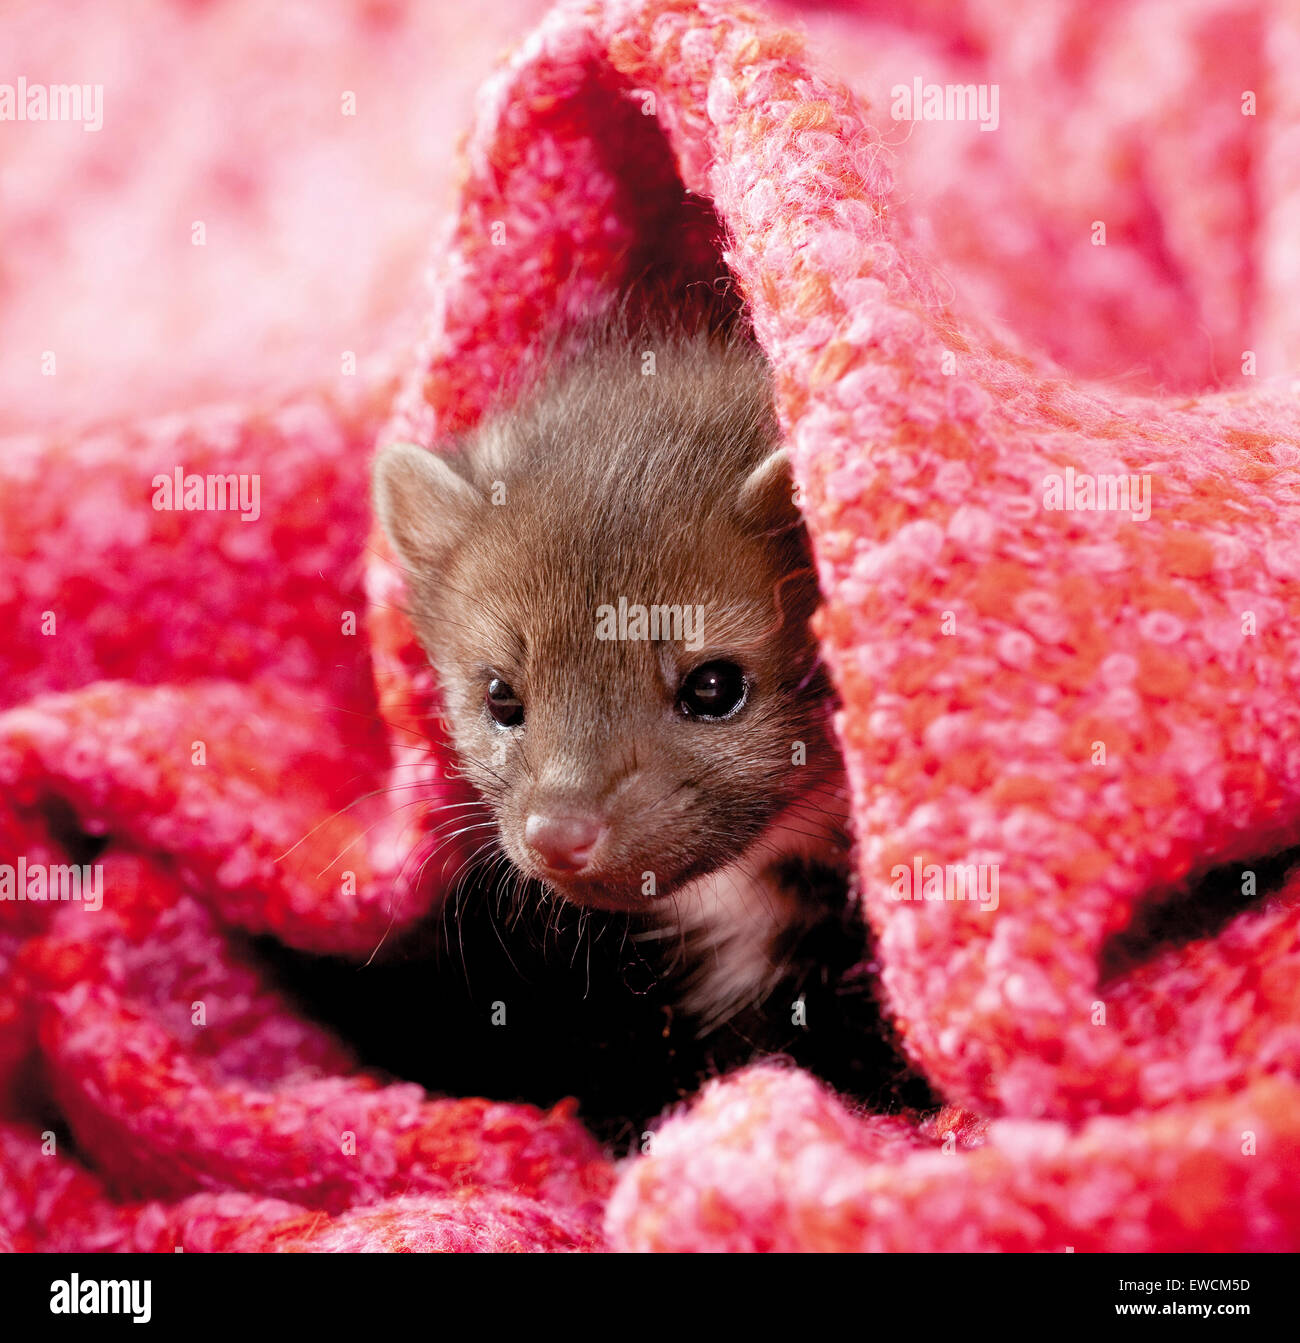 Beech Marten (Martes foina). Young in a pink comforter. Germany Stock Photo